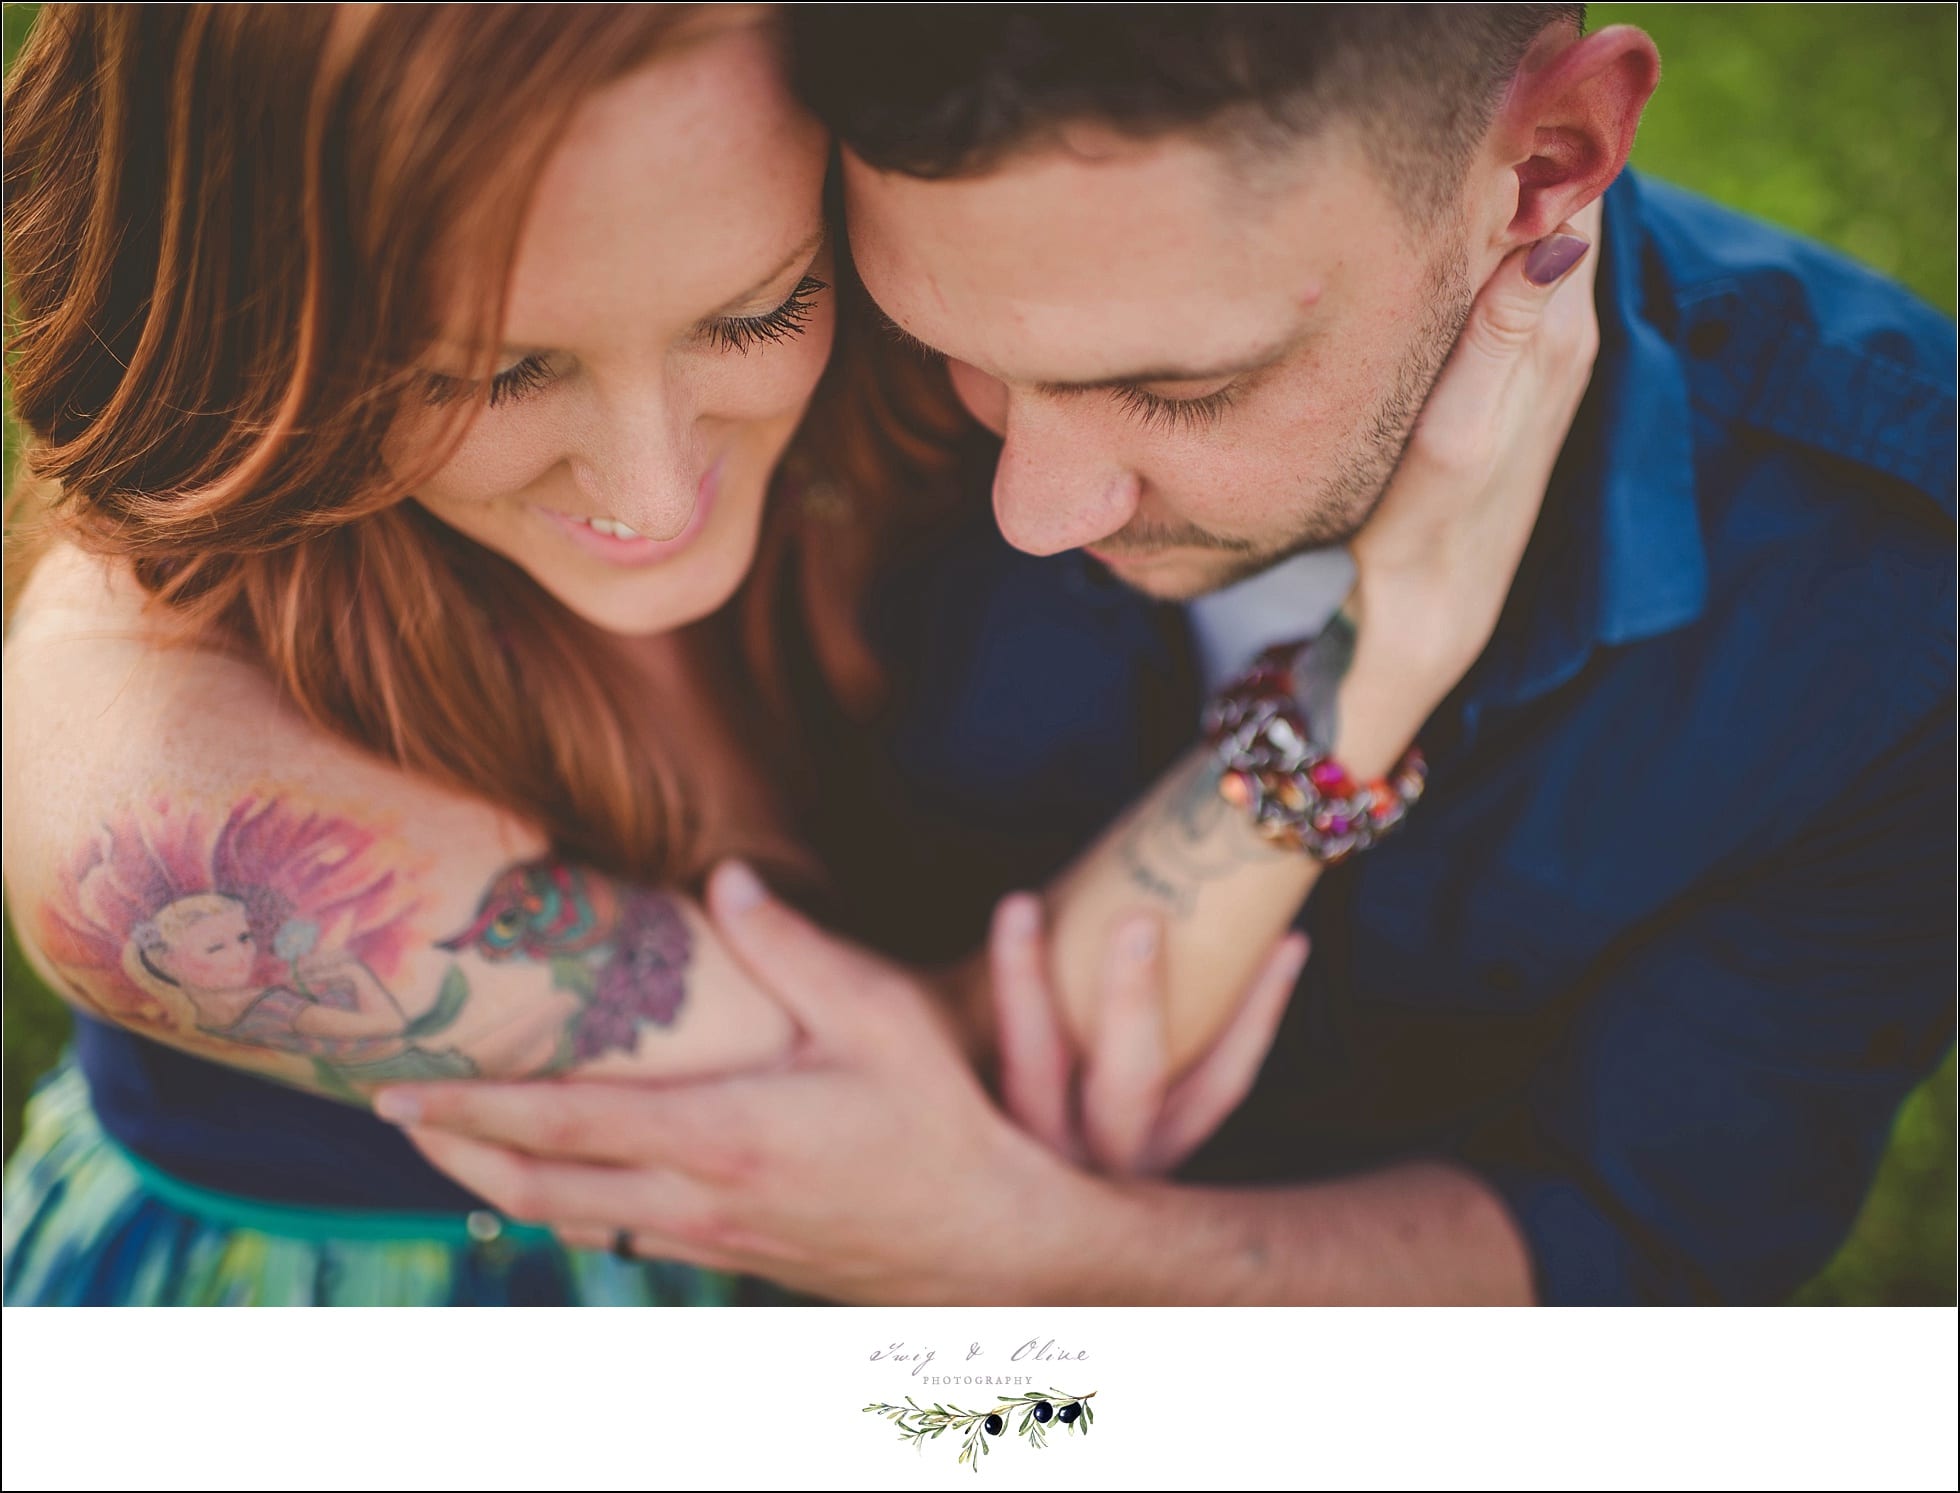 tattoos, merica, engagement, freedom, oh hell yeah!, Twig and Olive engagements, Sun Prairie area engagement sessions, TOP